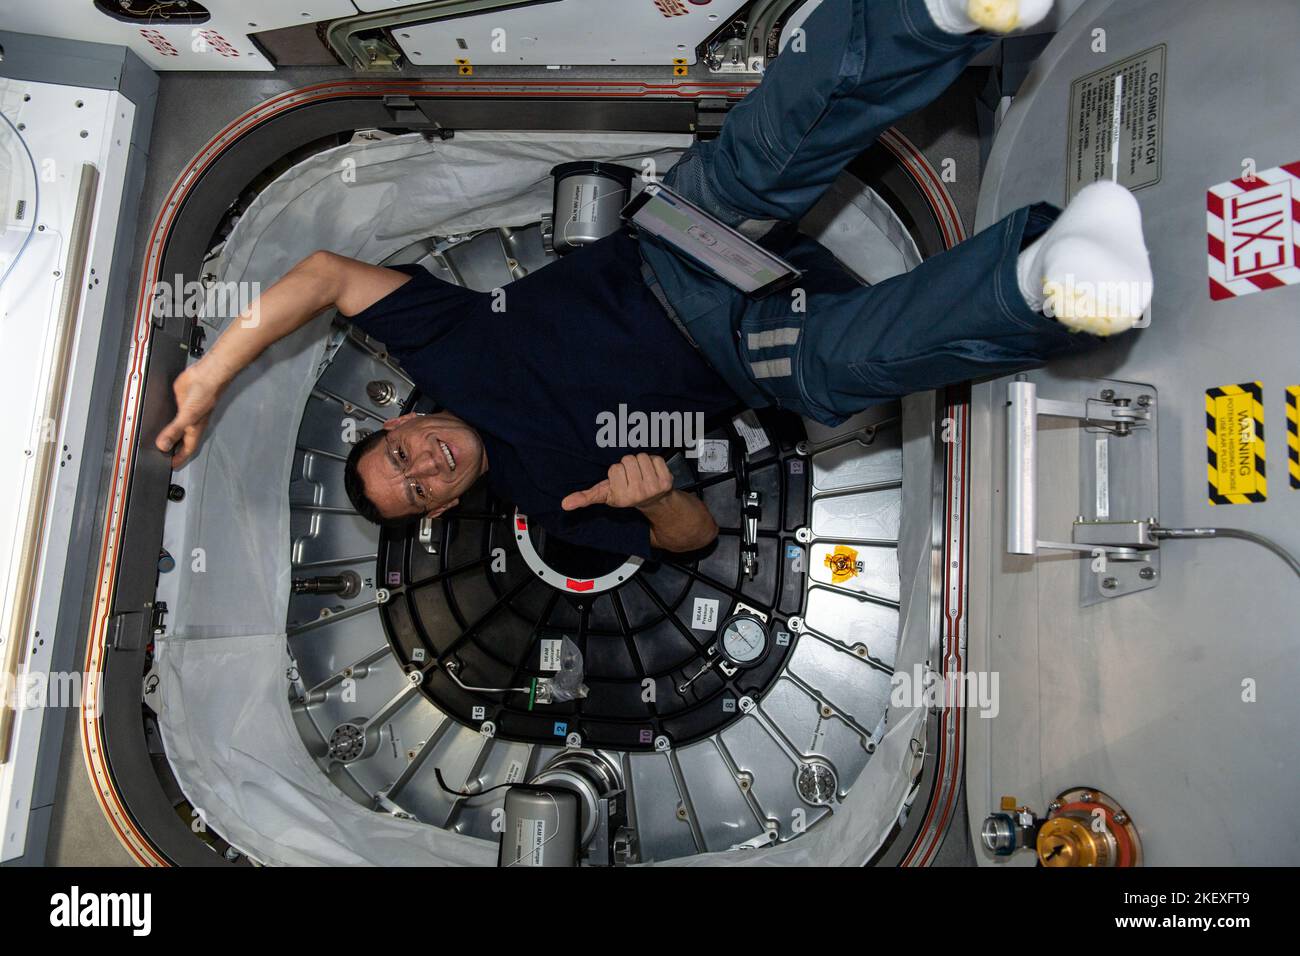 International Space Station, EARTH ORBIT. 17 October, 2022. NASA astronaut and Expedition 68 Flight Engineer Frank Rubio inside BEAM, the Bigelow Expandable Activity Module, during cargo activities aboard the International Space Station, October 17, 2022 in Earth Orbit. Stock Photo